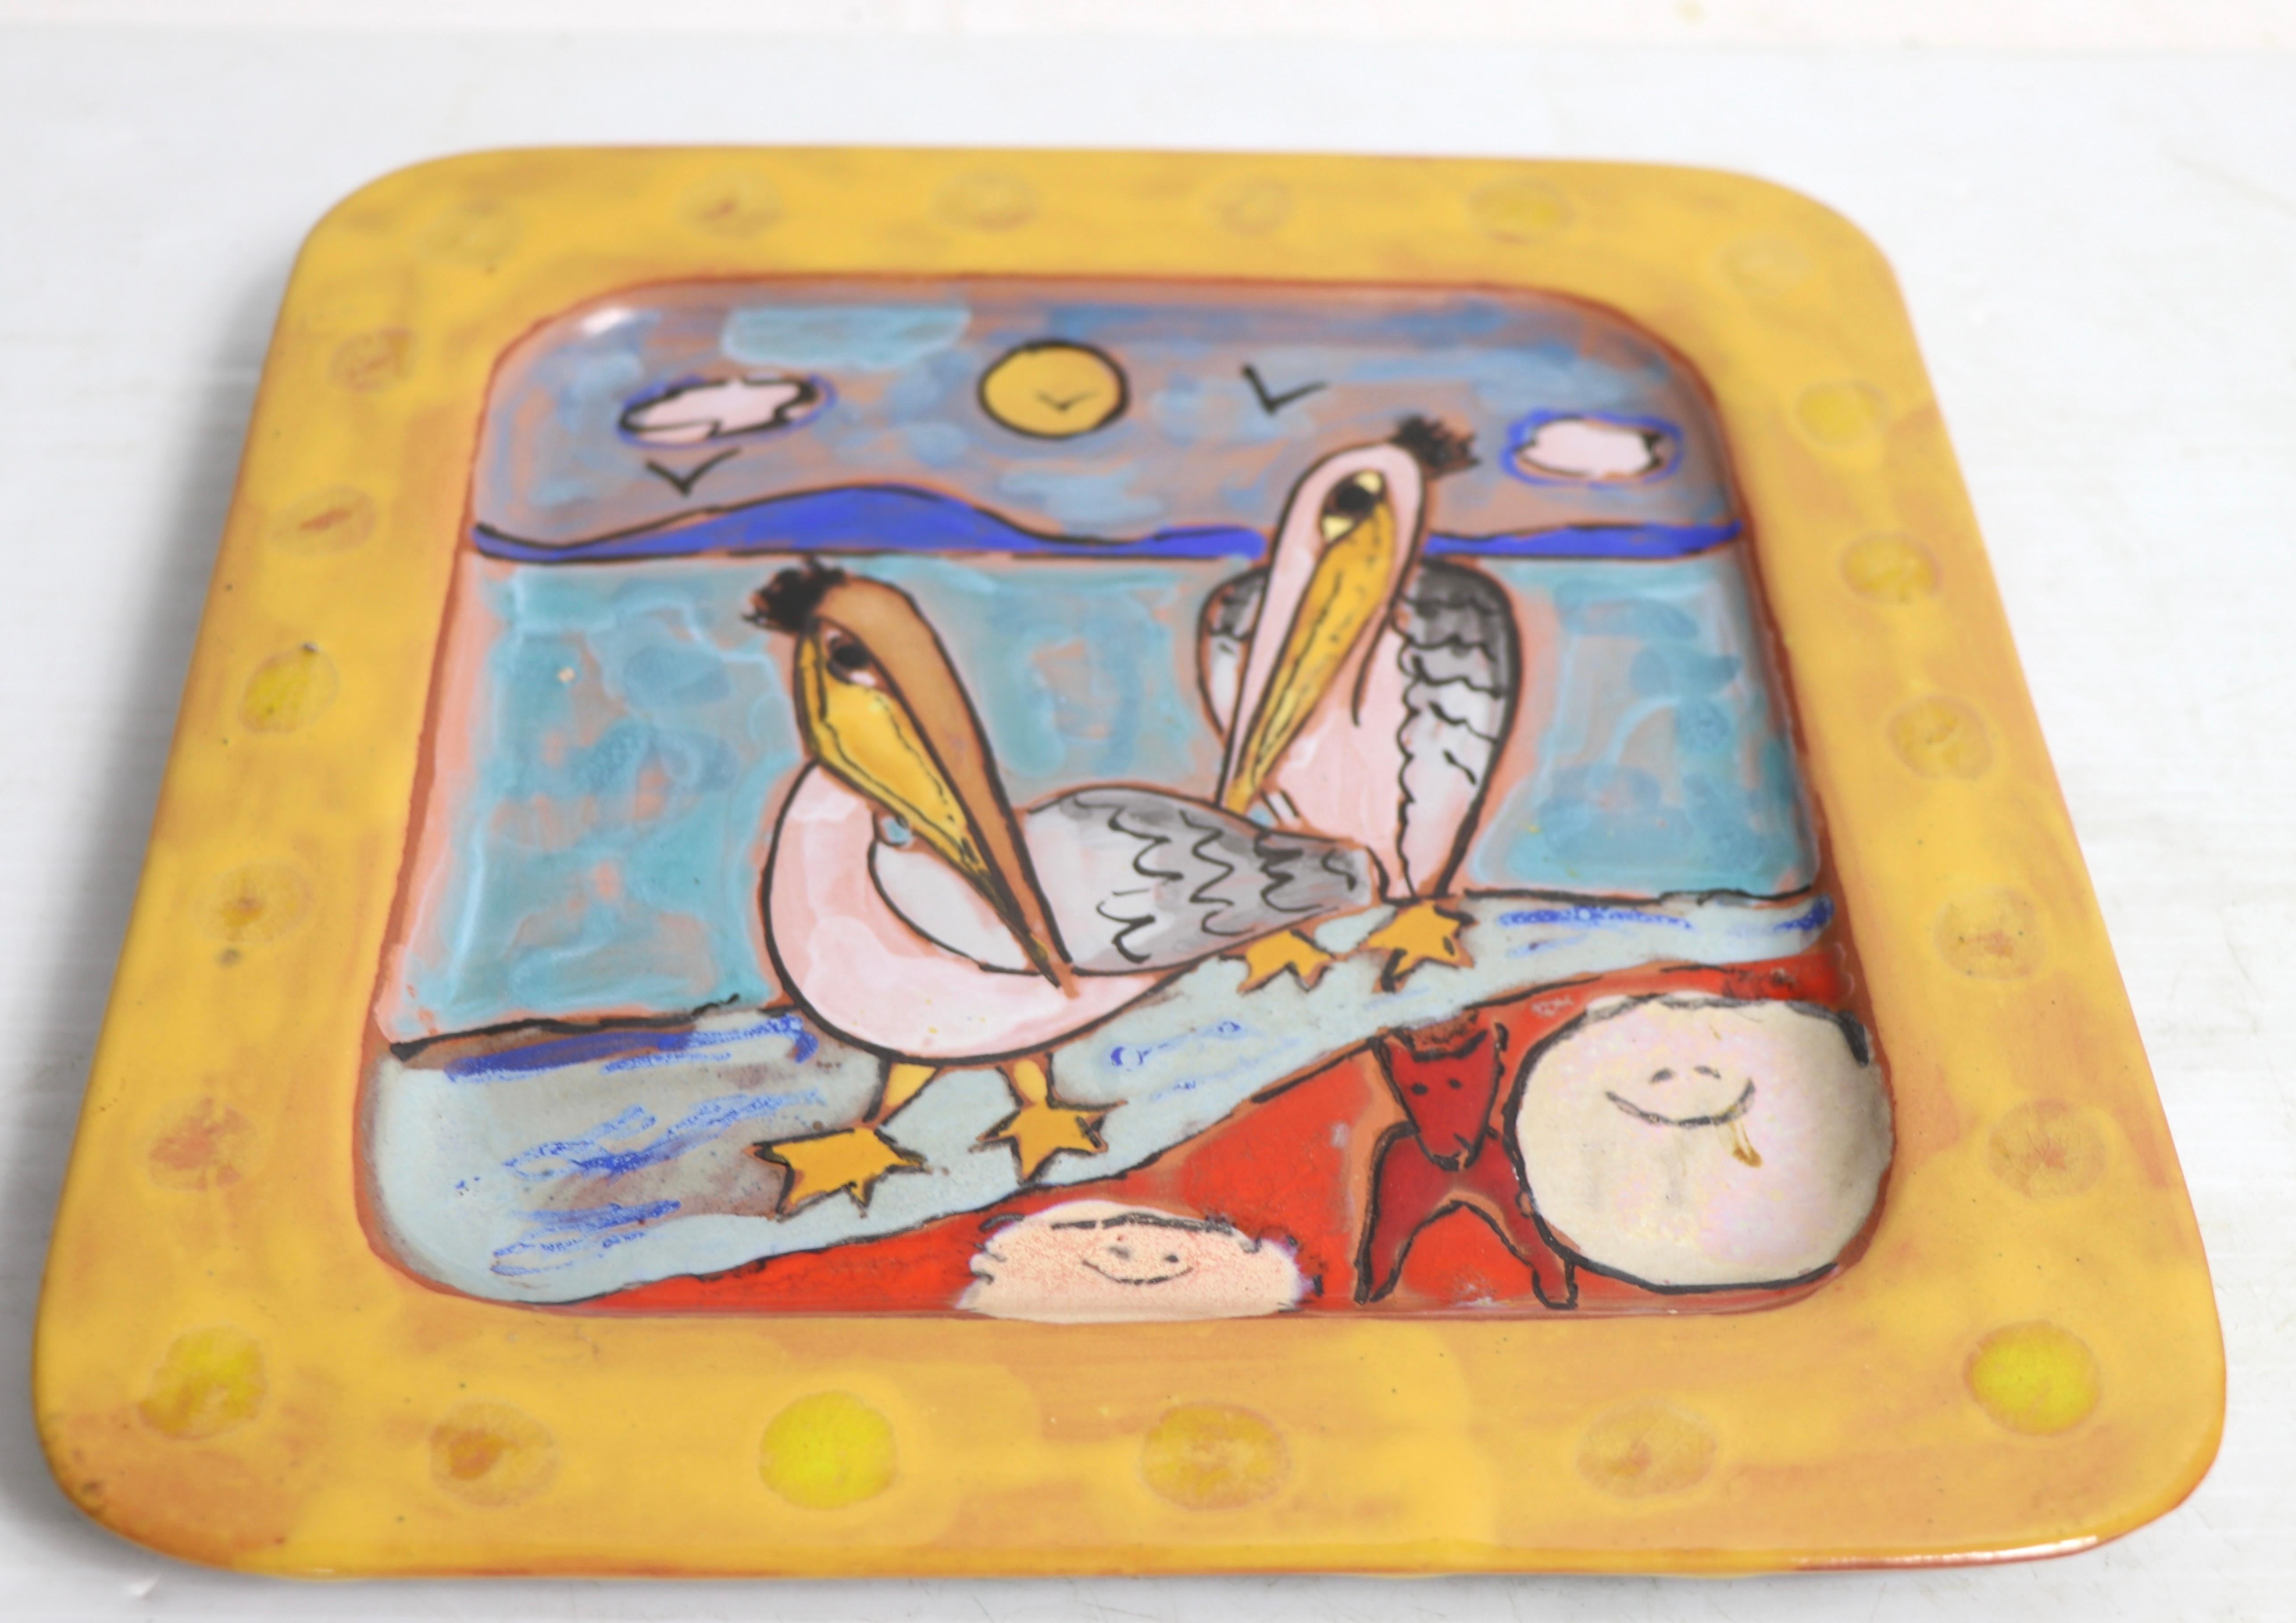 Exceptional art pottery plate by noted ceramicist Martine Azema, Made in Vallauris France, circa 1970's. The decorative plate depicts two stylized pelicans, and a red dog, along the shore. Fully and correctly marked on verso, as shown. This example